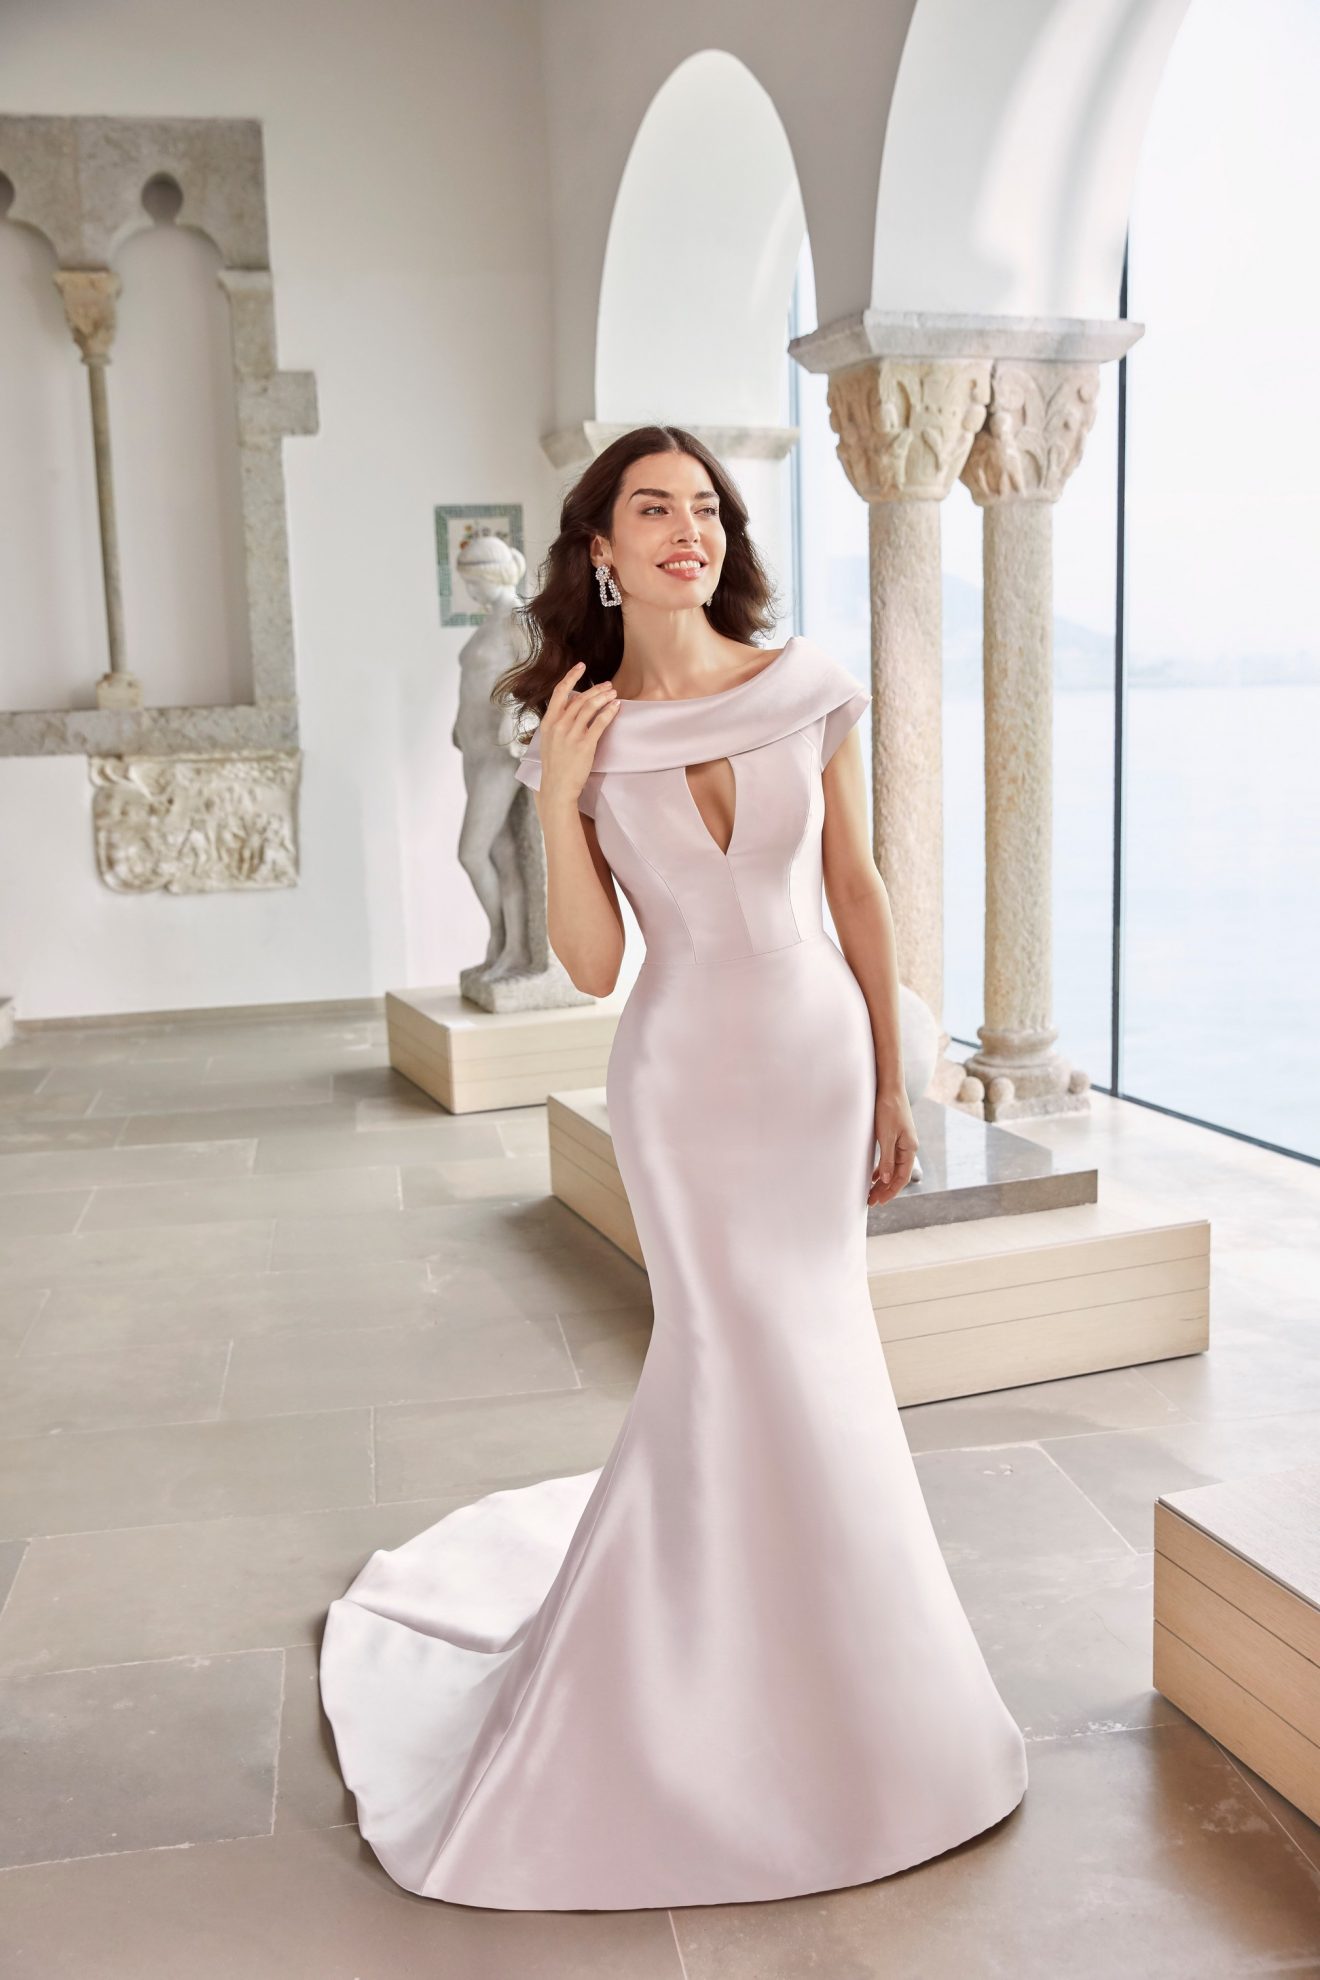 this image shows the floretta wedding dress by ronald joyce which showcases wedding dress trends such as daring cut-outs